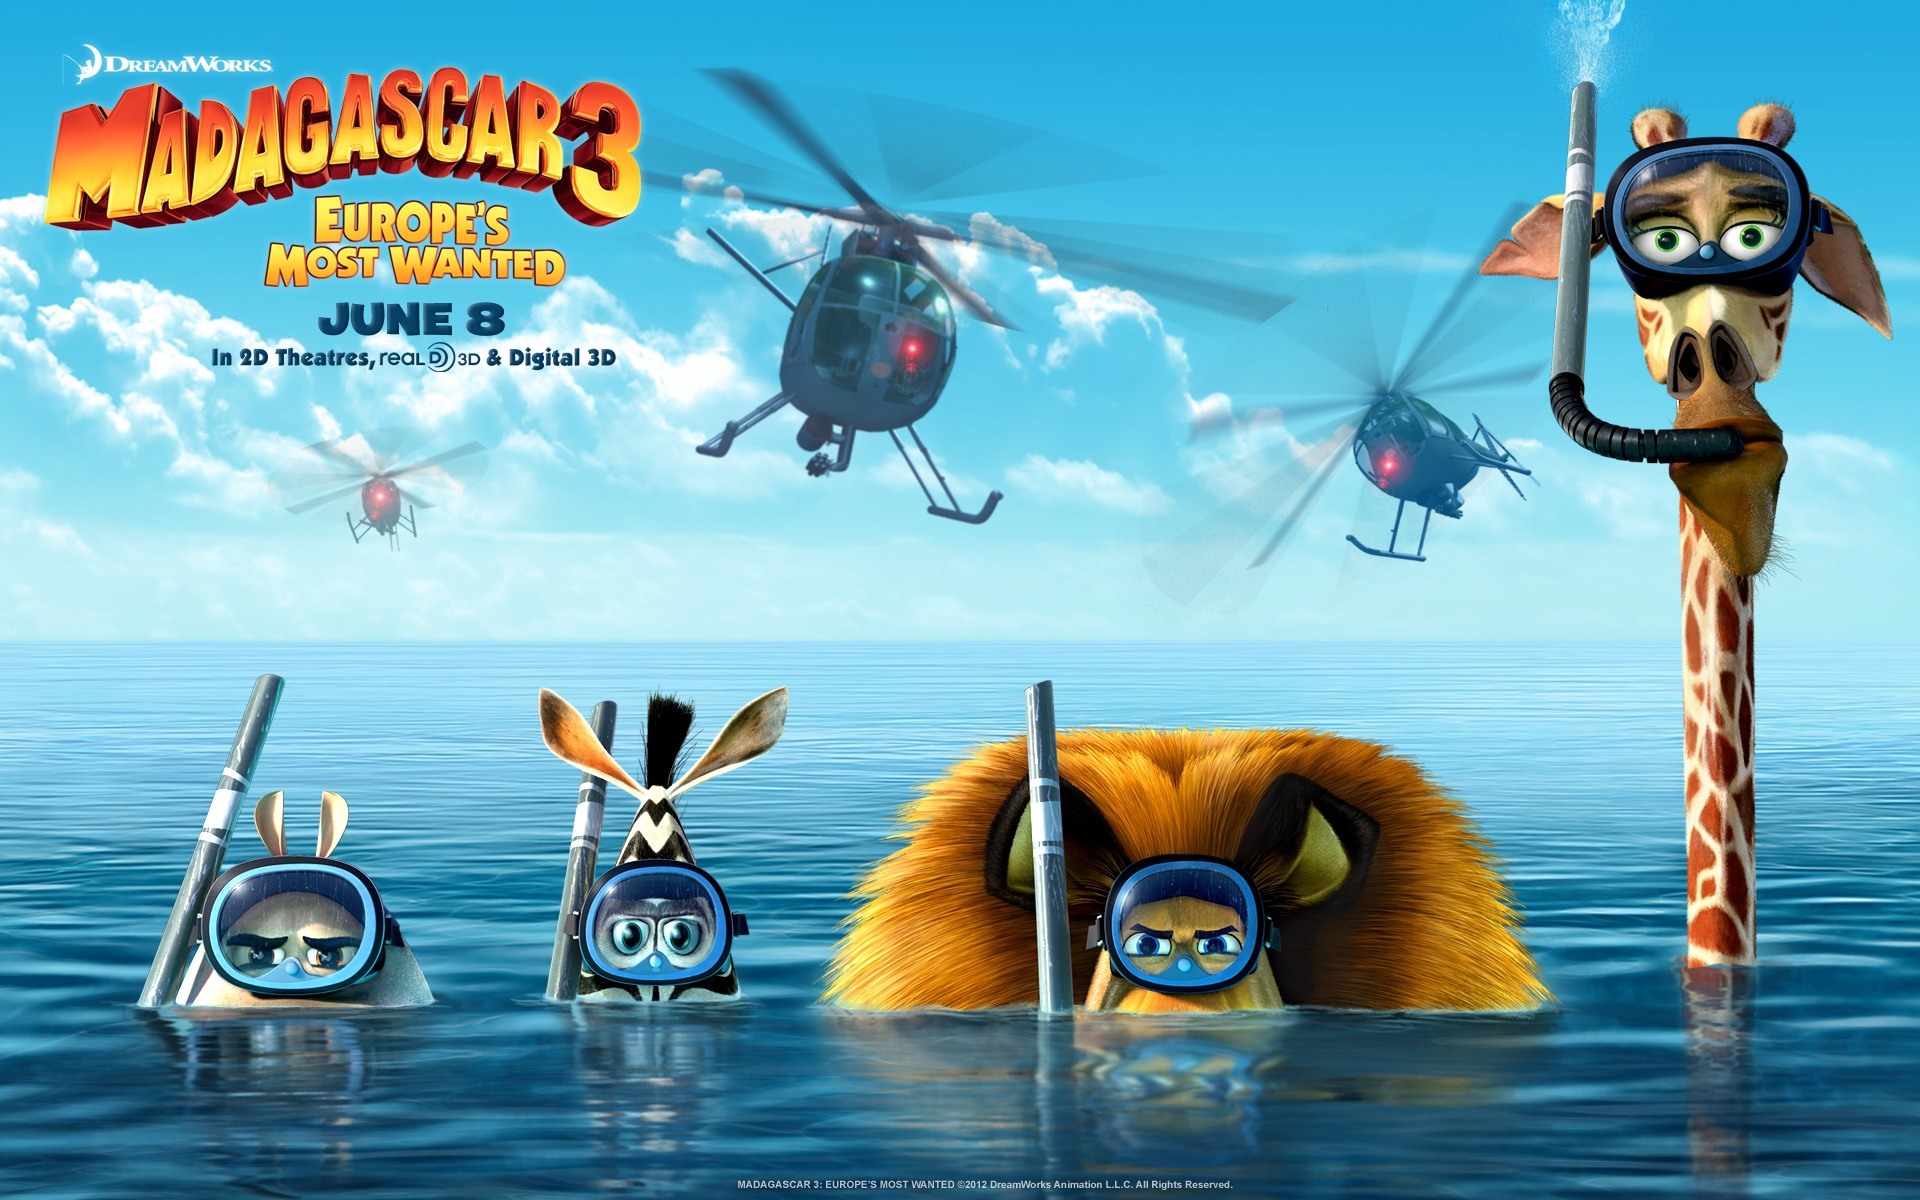 Madagascar 3: Europe's Most Wanted HD wallpapers #10 - 1920x1200